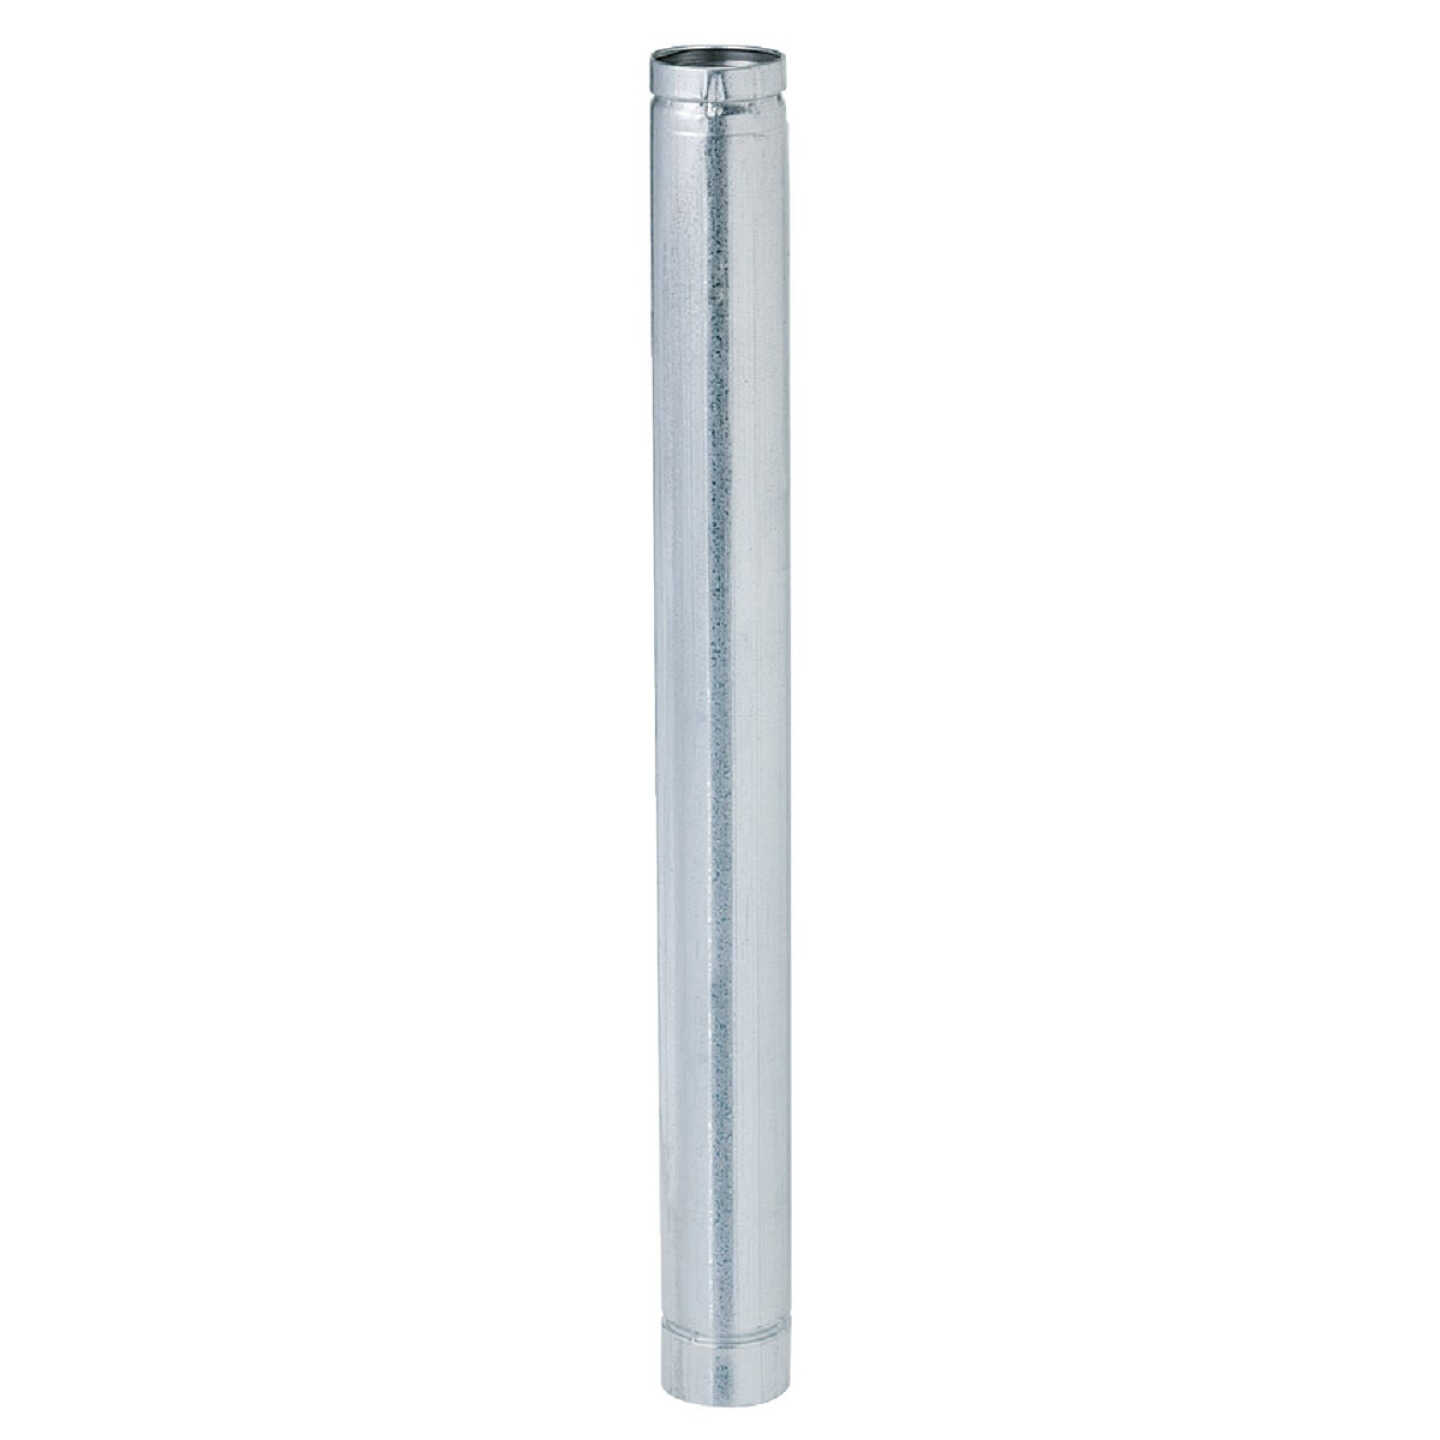 SELKIRK VP Pellet Pipe Type L Insulated 3 In. x 3 Ft. Pellet Stove Pipe -  Gillman Home Center